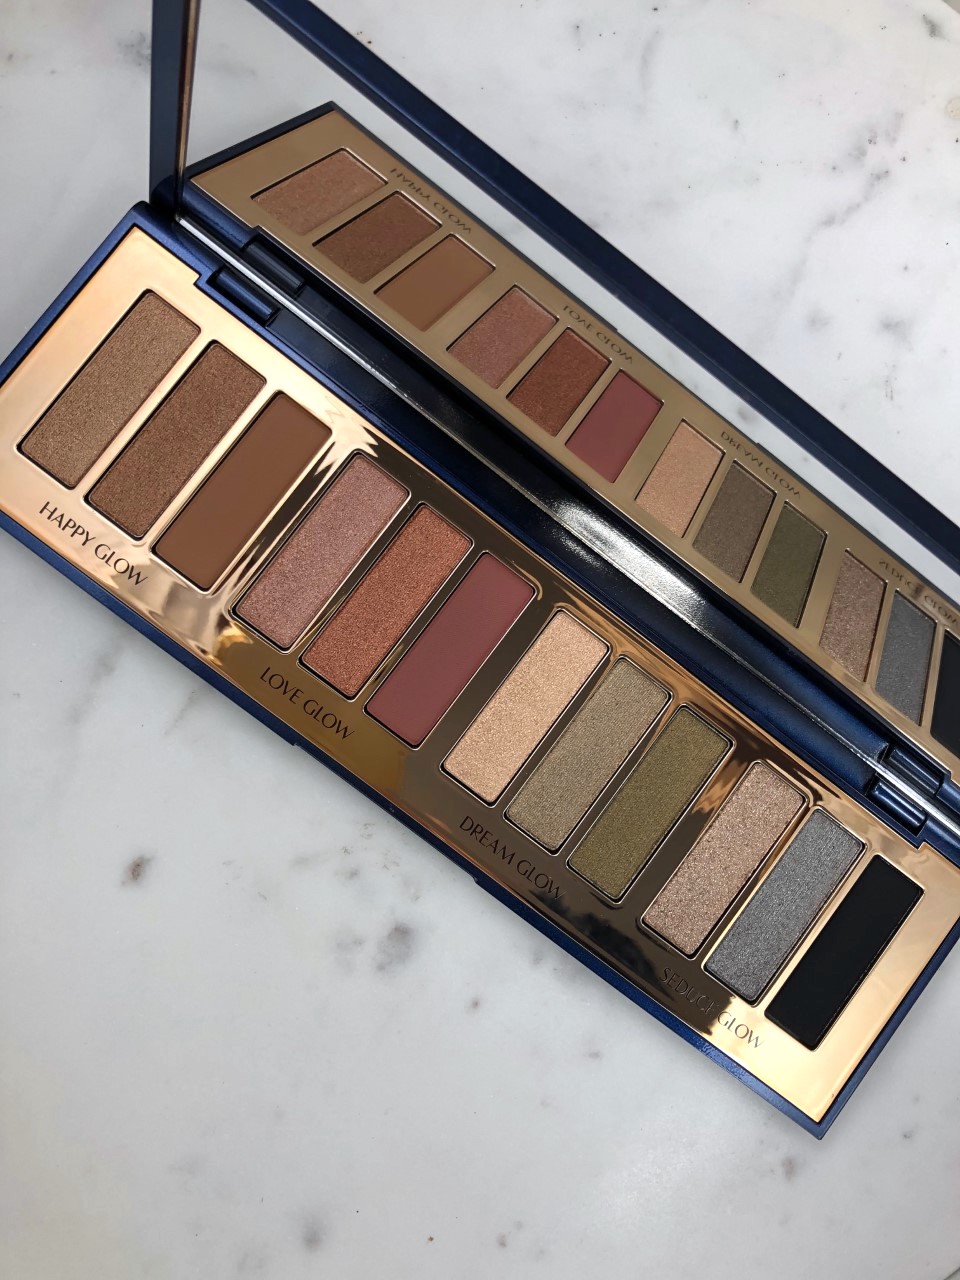 Charlotte Tilbury Starry Eyes to Hypnotize Palette: A quick review